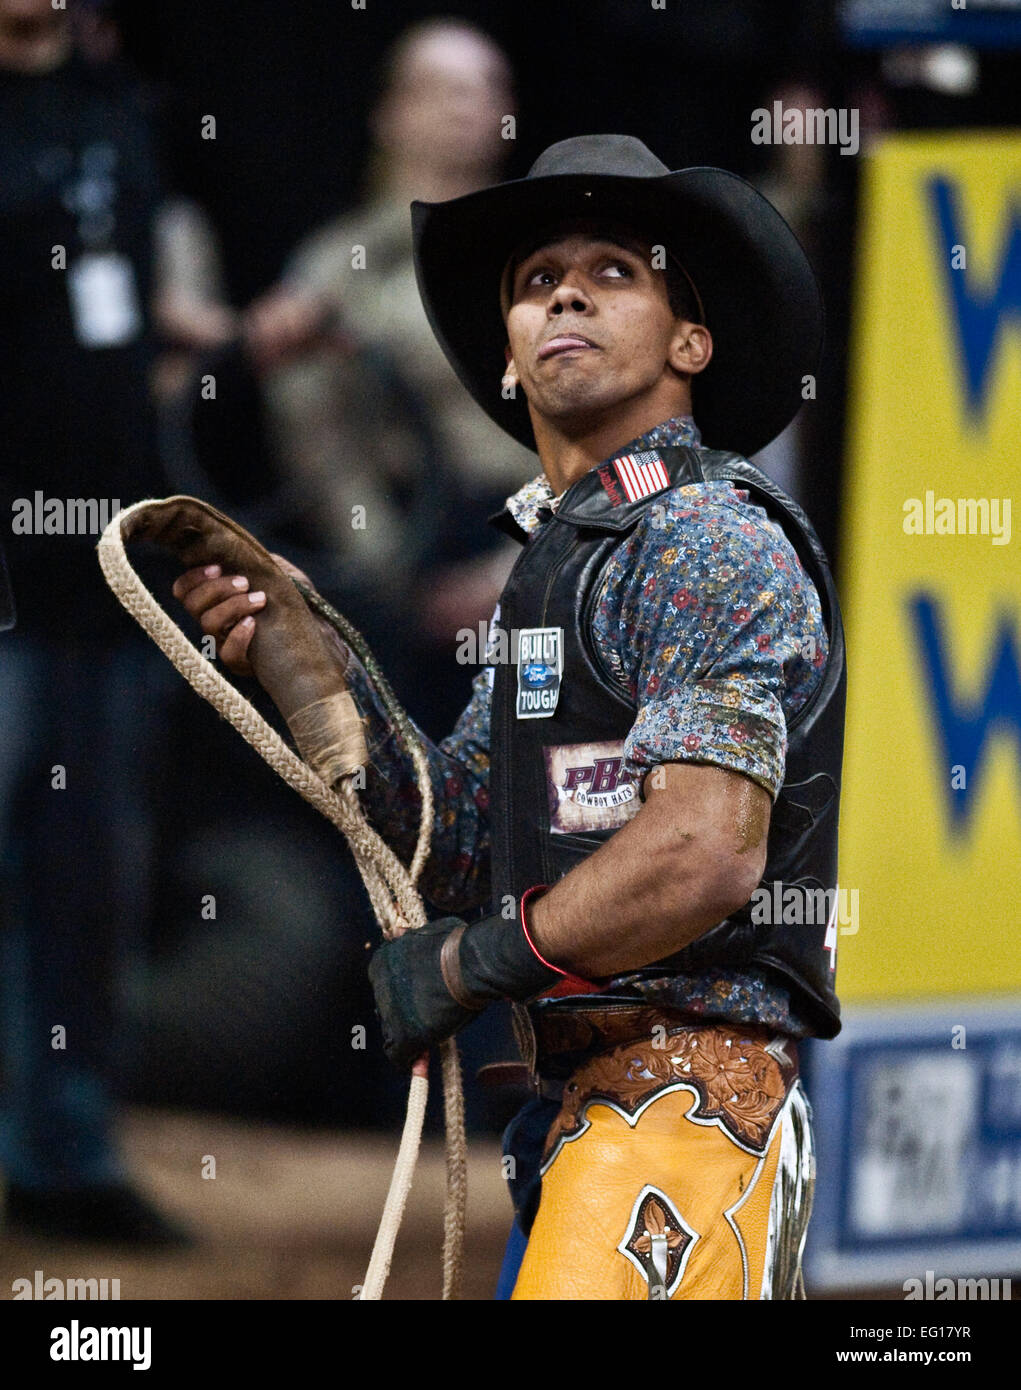 Paulo Lima a professional bull rider looks up at the jumbo tron in the Thomas and Mack Center for his score during the Professional Bull Riding Finals Oct. 22. Nellis Air Force Base Airmen were honored for their service to the country during Air Force night at the PBR Finals .  U.S. Air Force photo / Tech. Sgt. Michael R. Holzworth Stock Photo